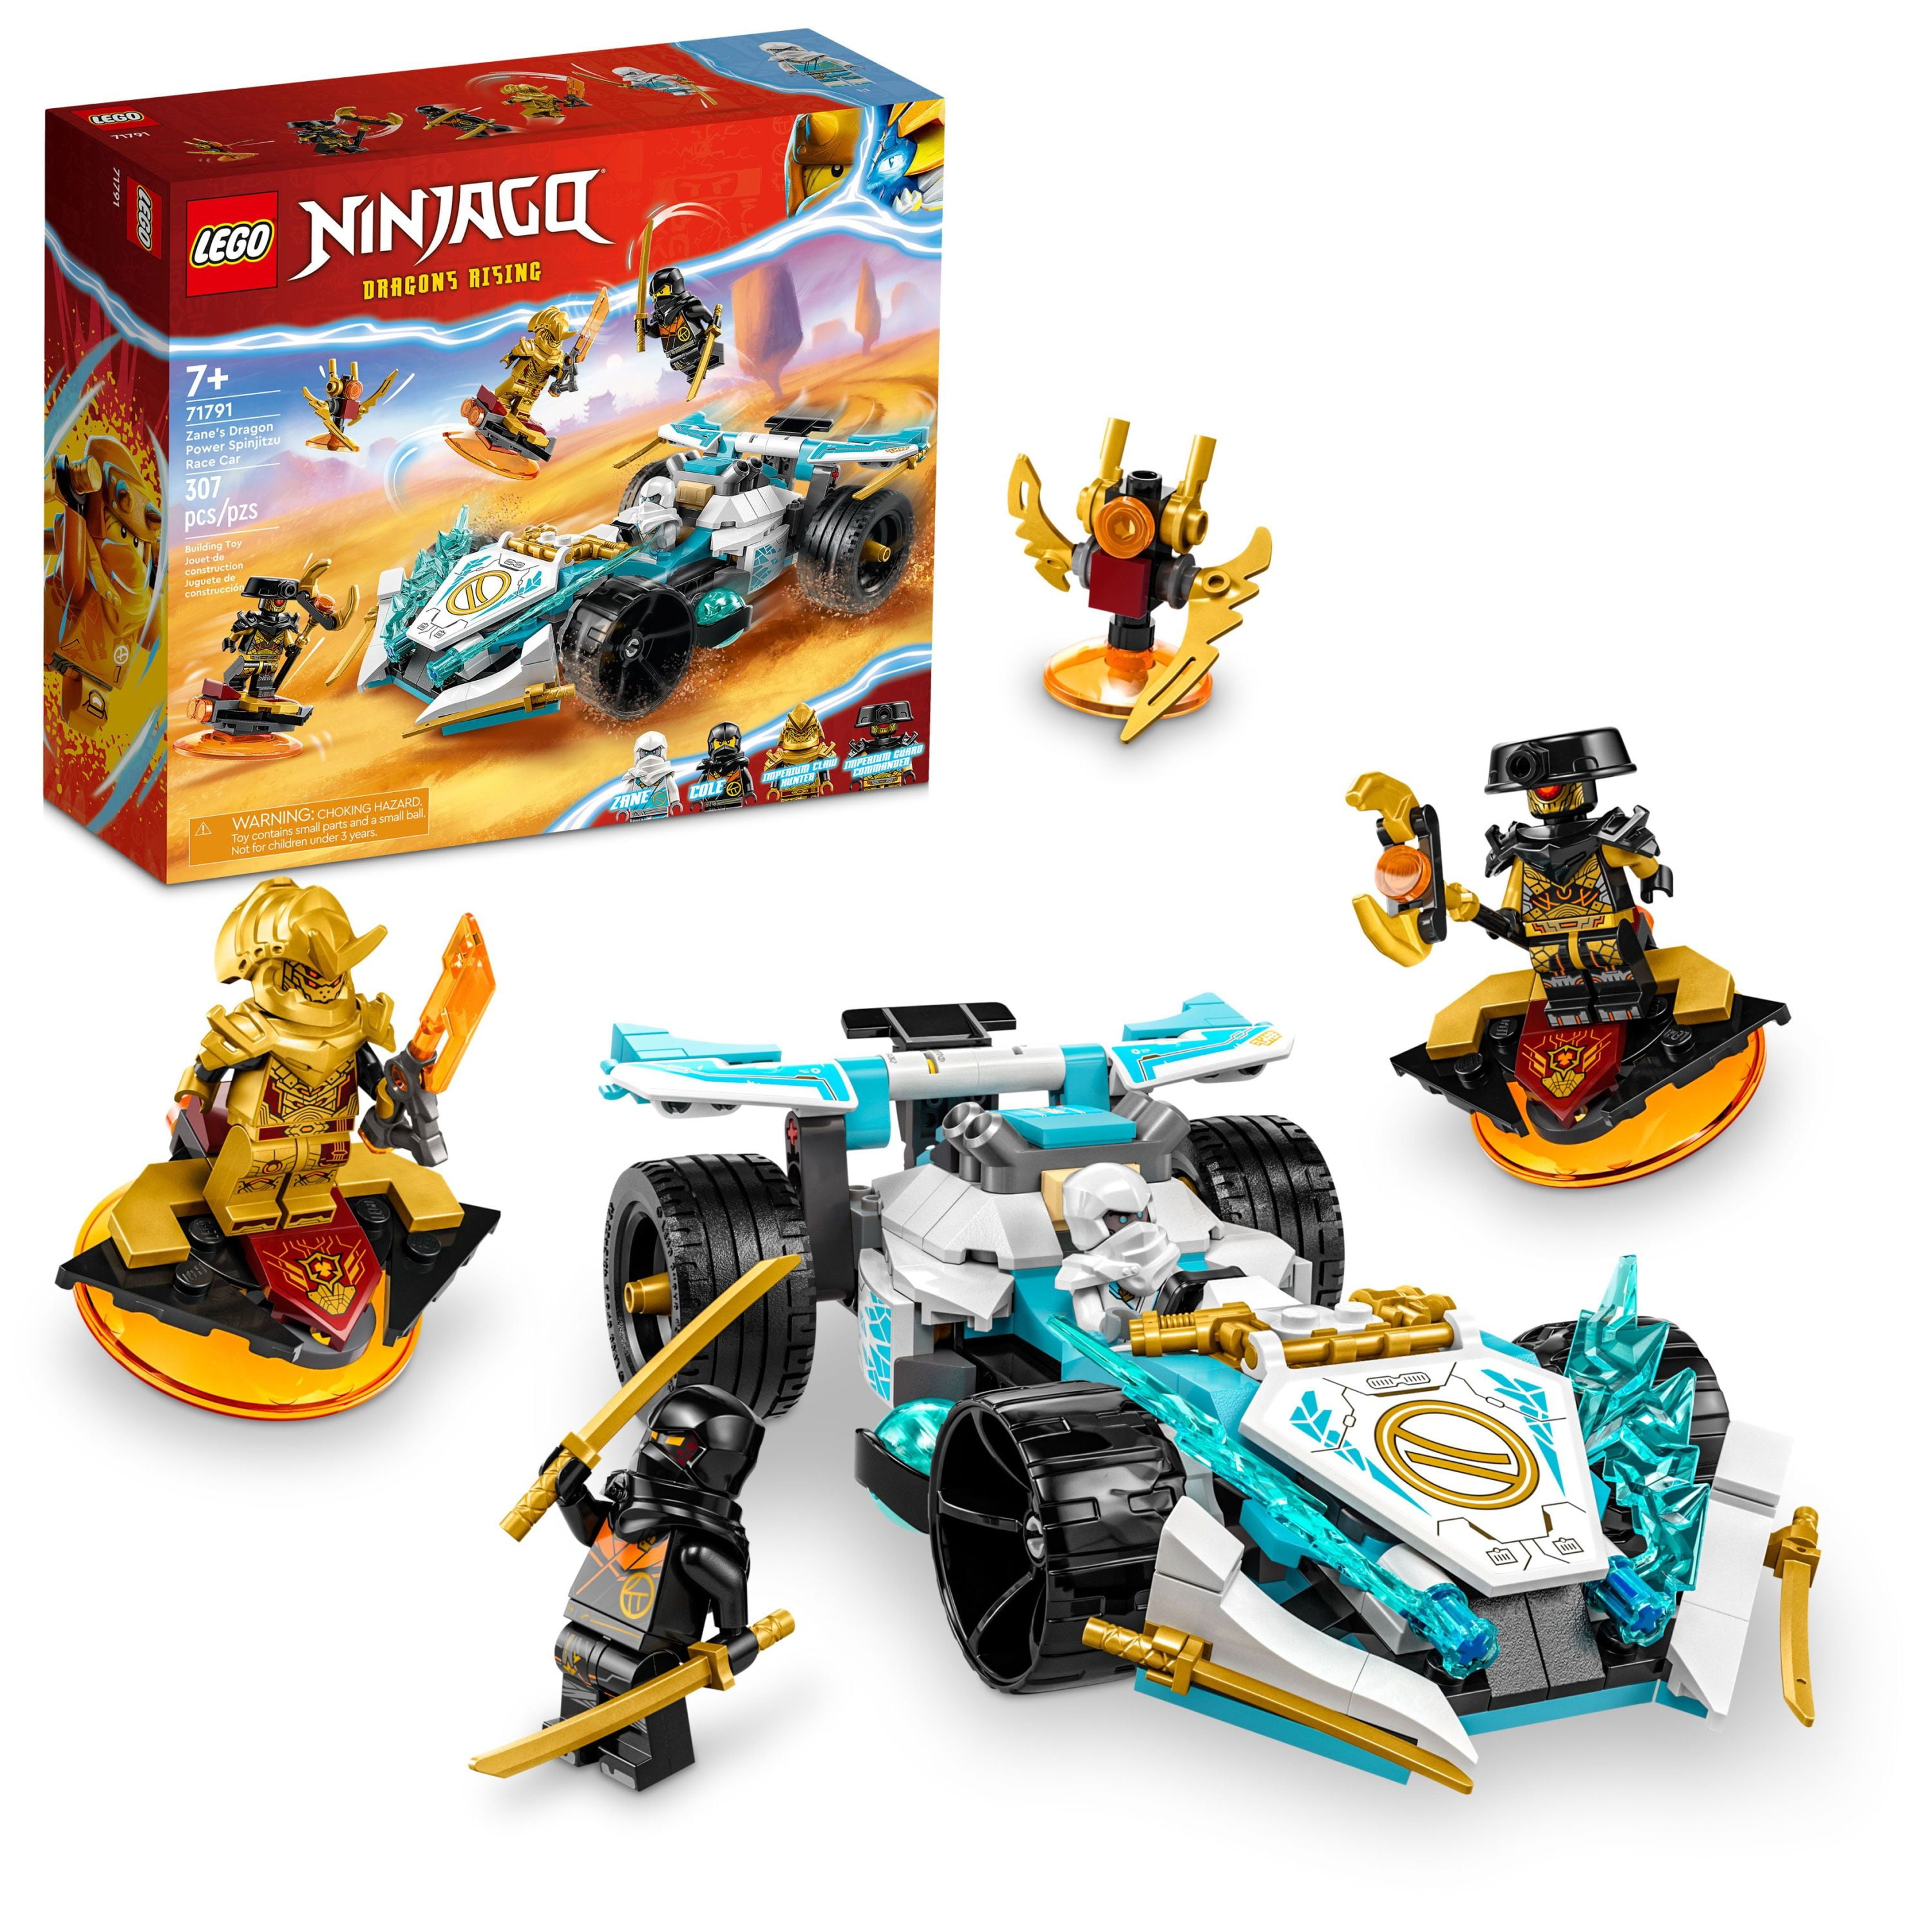 LEGO NINJAGO Zane's Dragon Power Race Car 71791 Building Toy Set, Features a Ninja Car, 2 Hover Dragon Toy, and 4 Minifigures, Gift for Kids Aged 7+ - Walmart.com